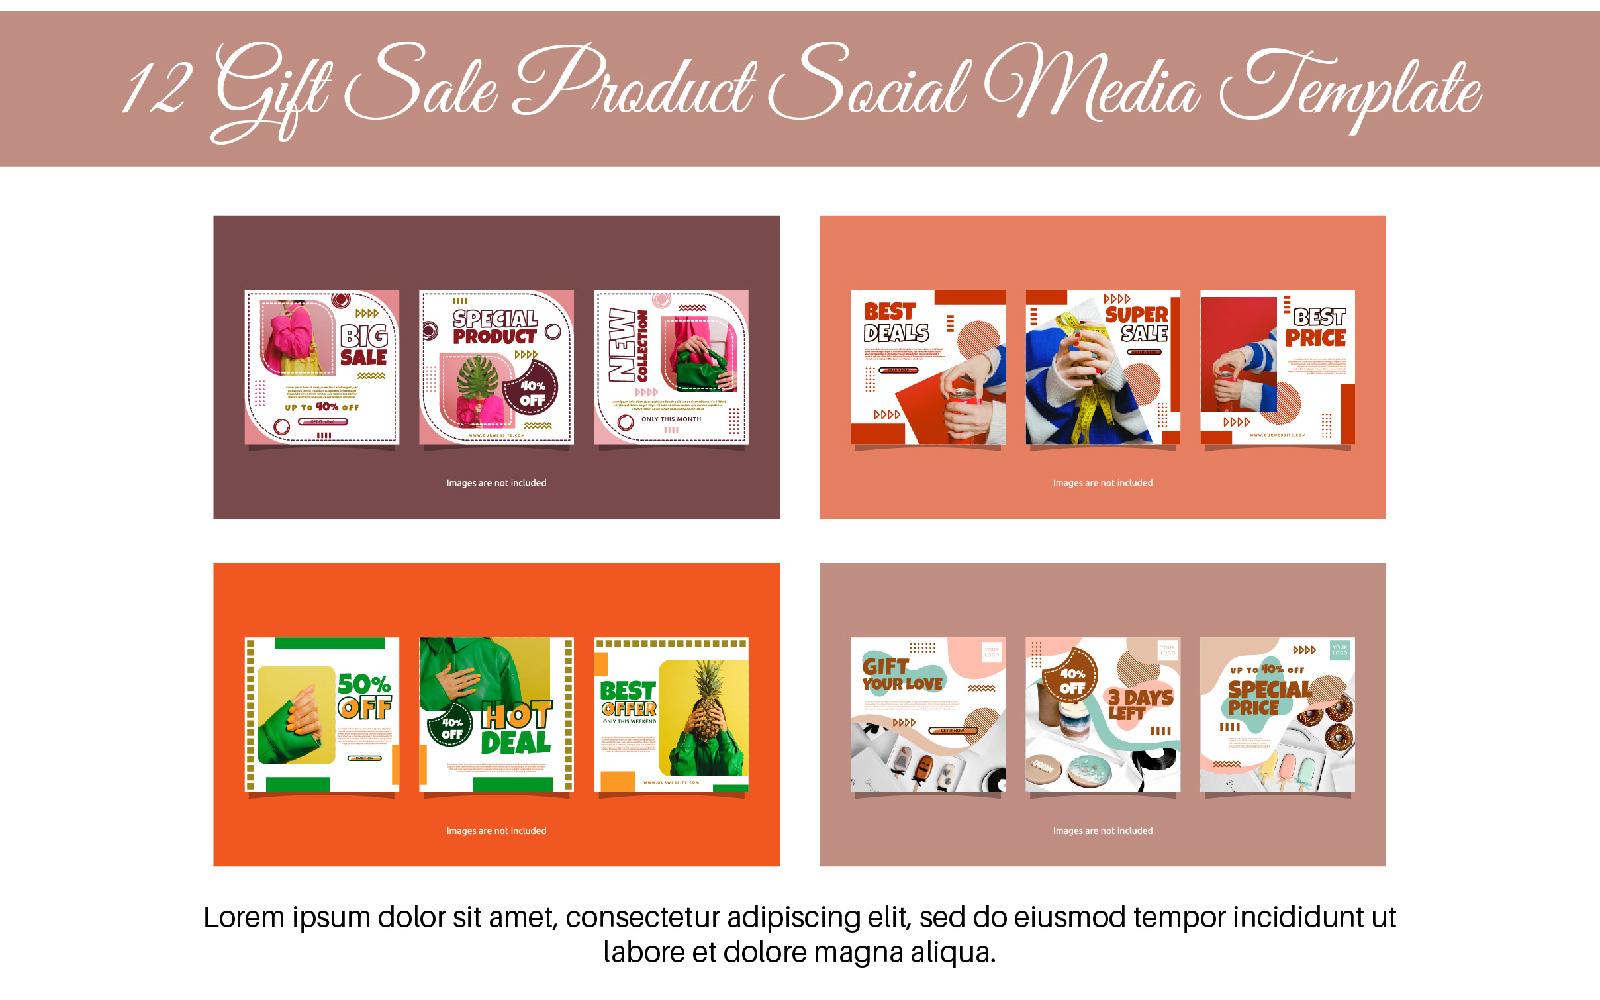 12 Gift Sale Product Social Media Template